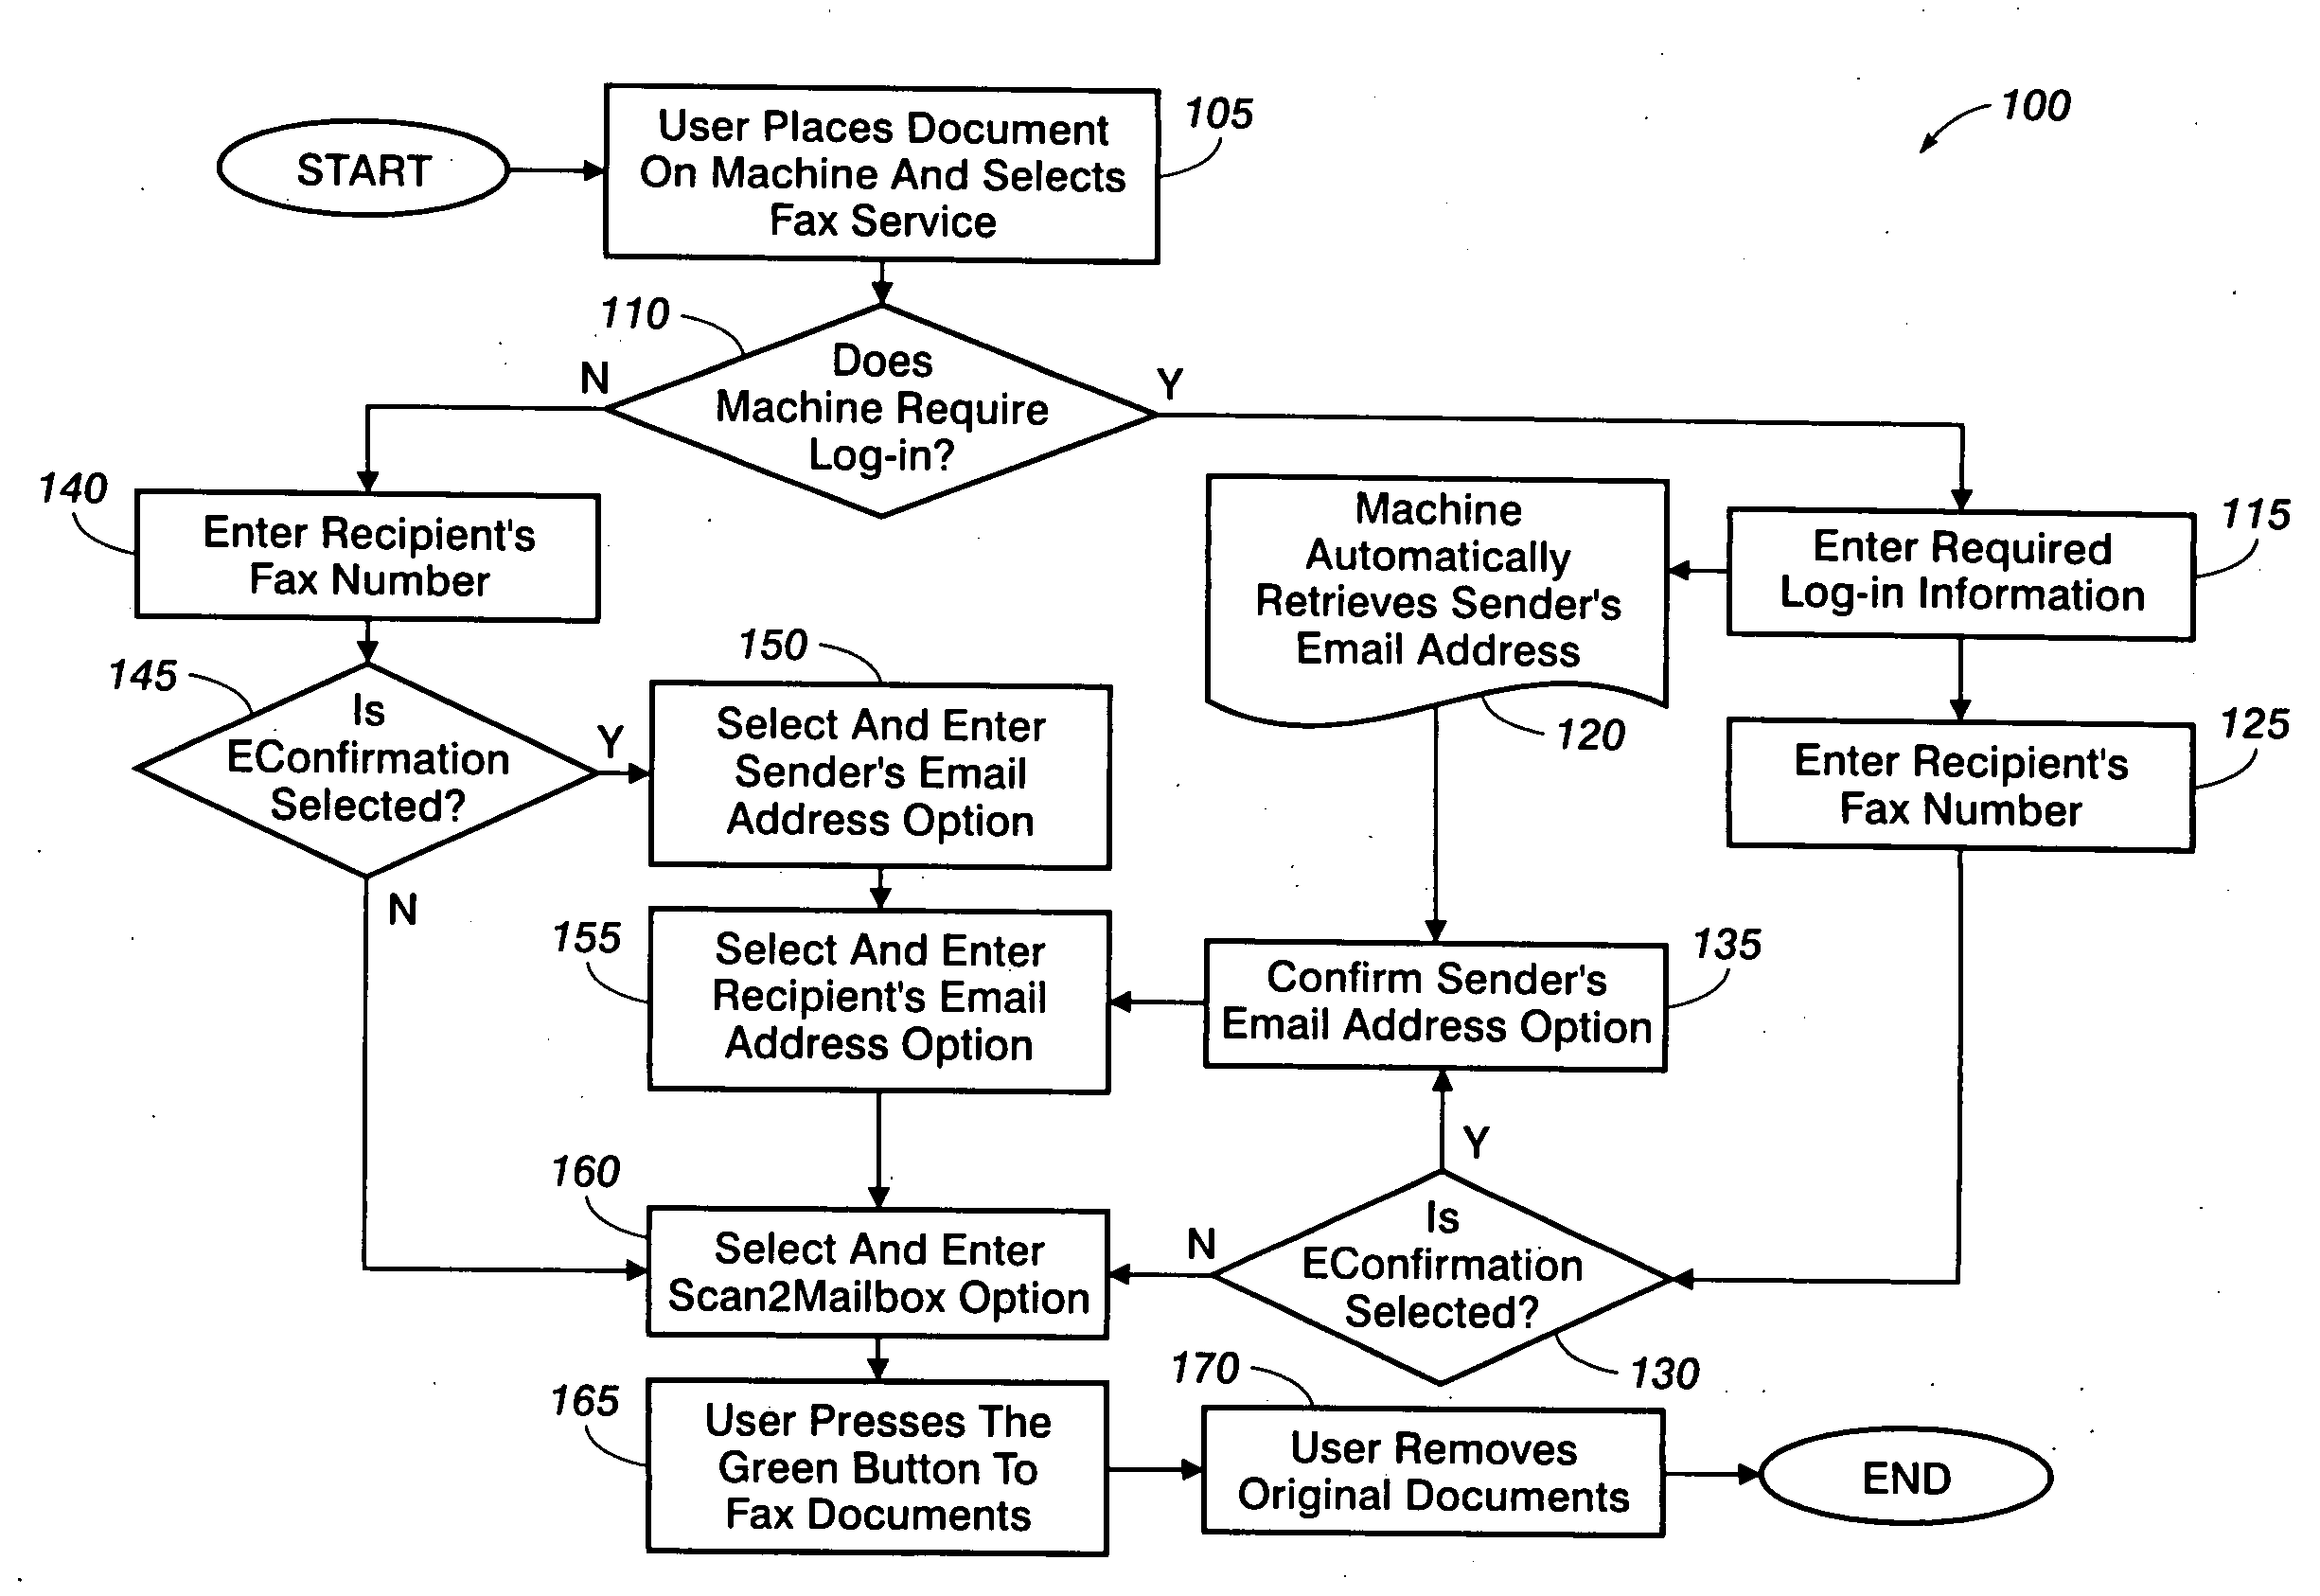 Systems and methods for secure fax transmission status notification